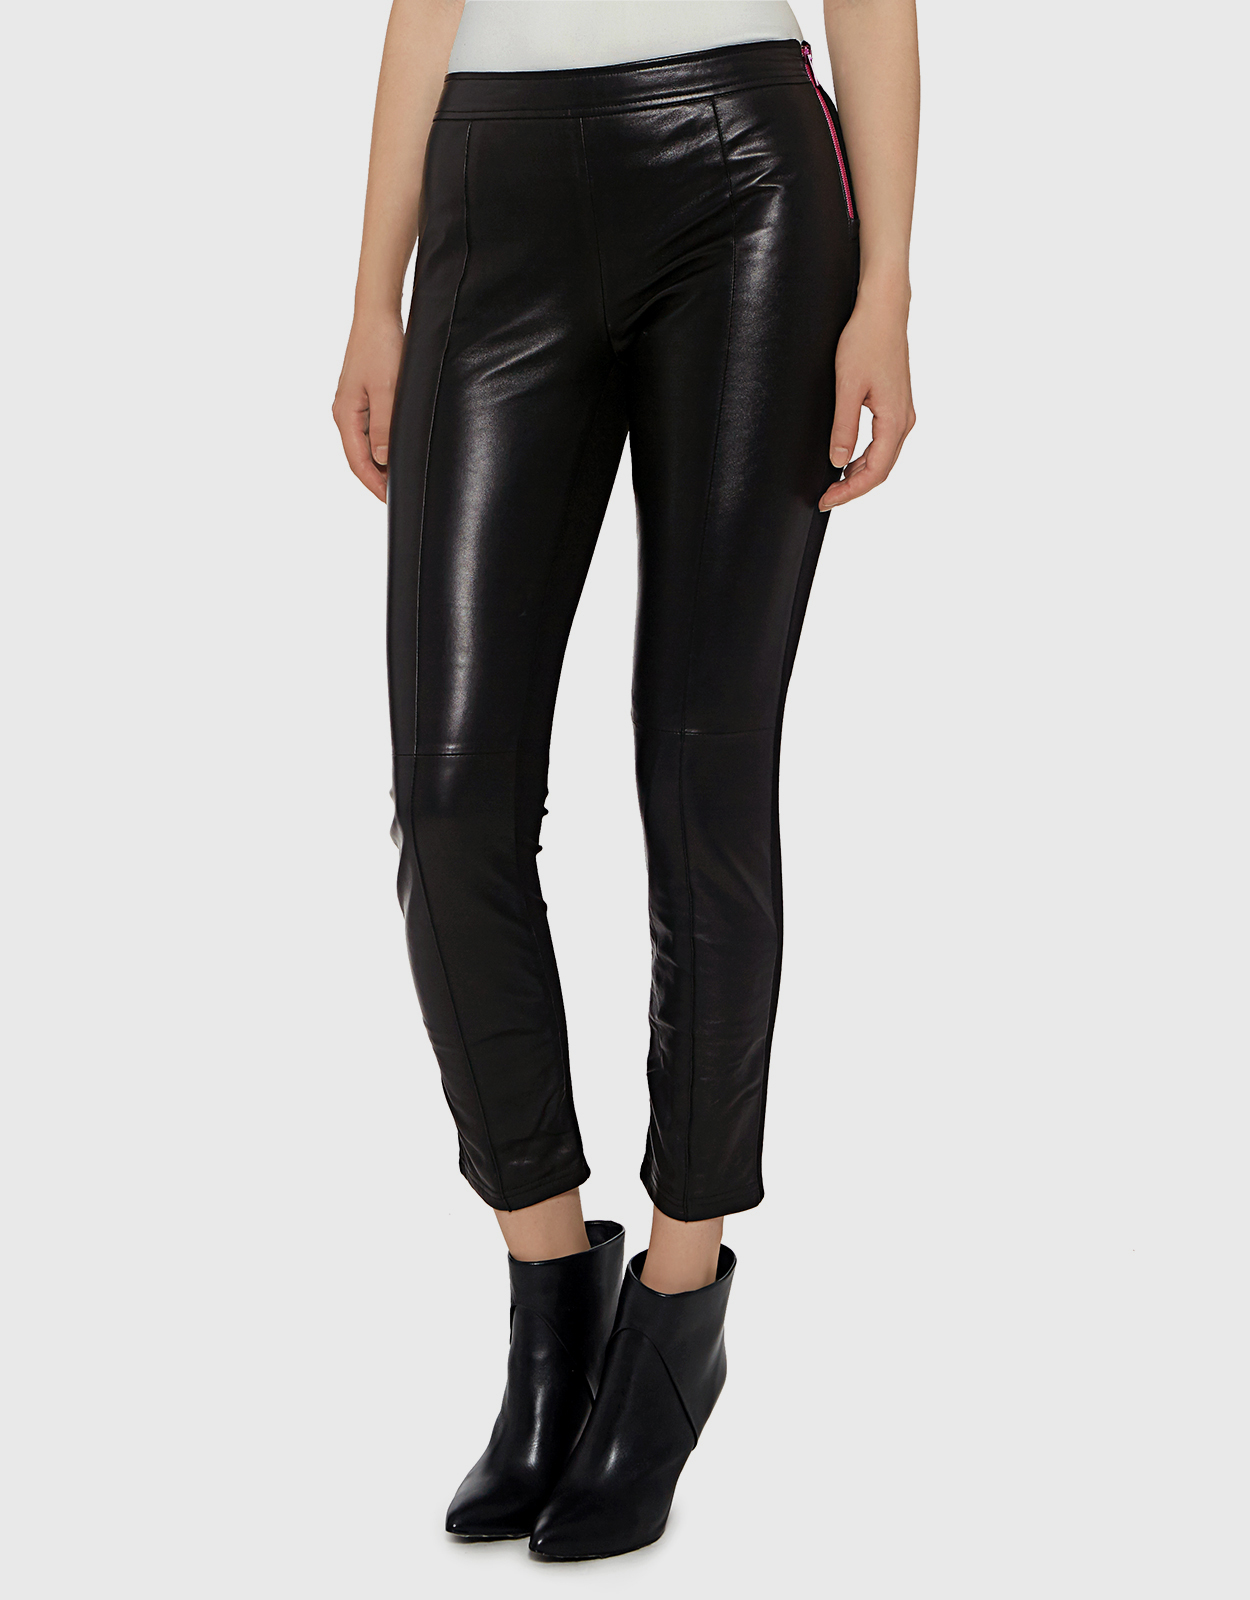 Moschino Leather Pants / Black Quilted High Waist Pants / Skinny Leather  Pants / Biker Rocker Leather Pants / Moschino / Designer Pants -  Canada